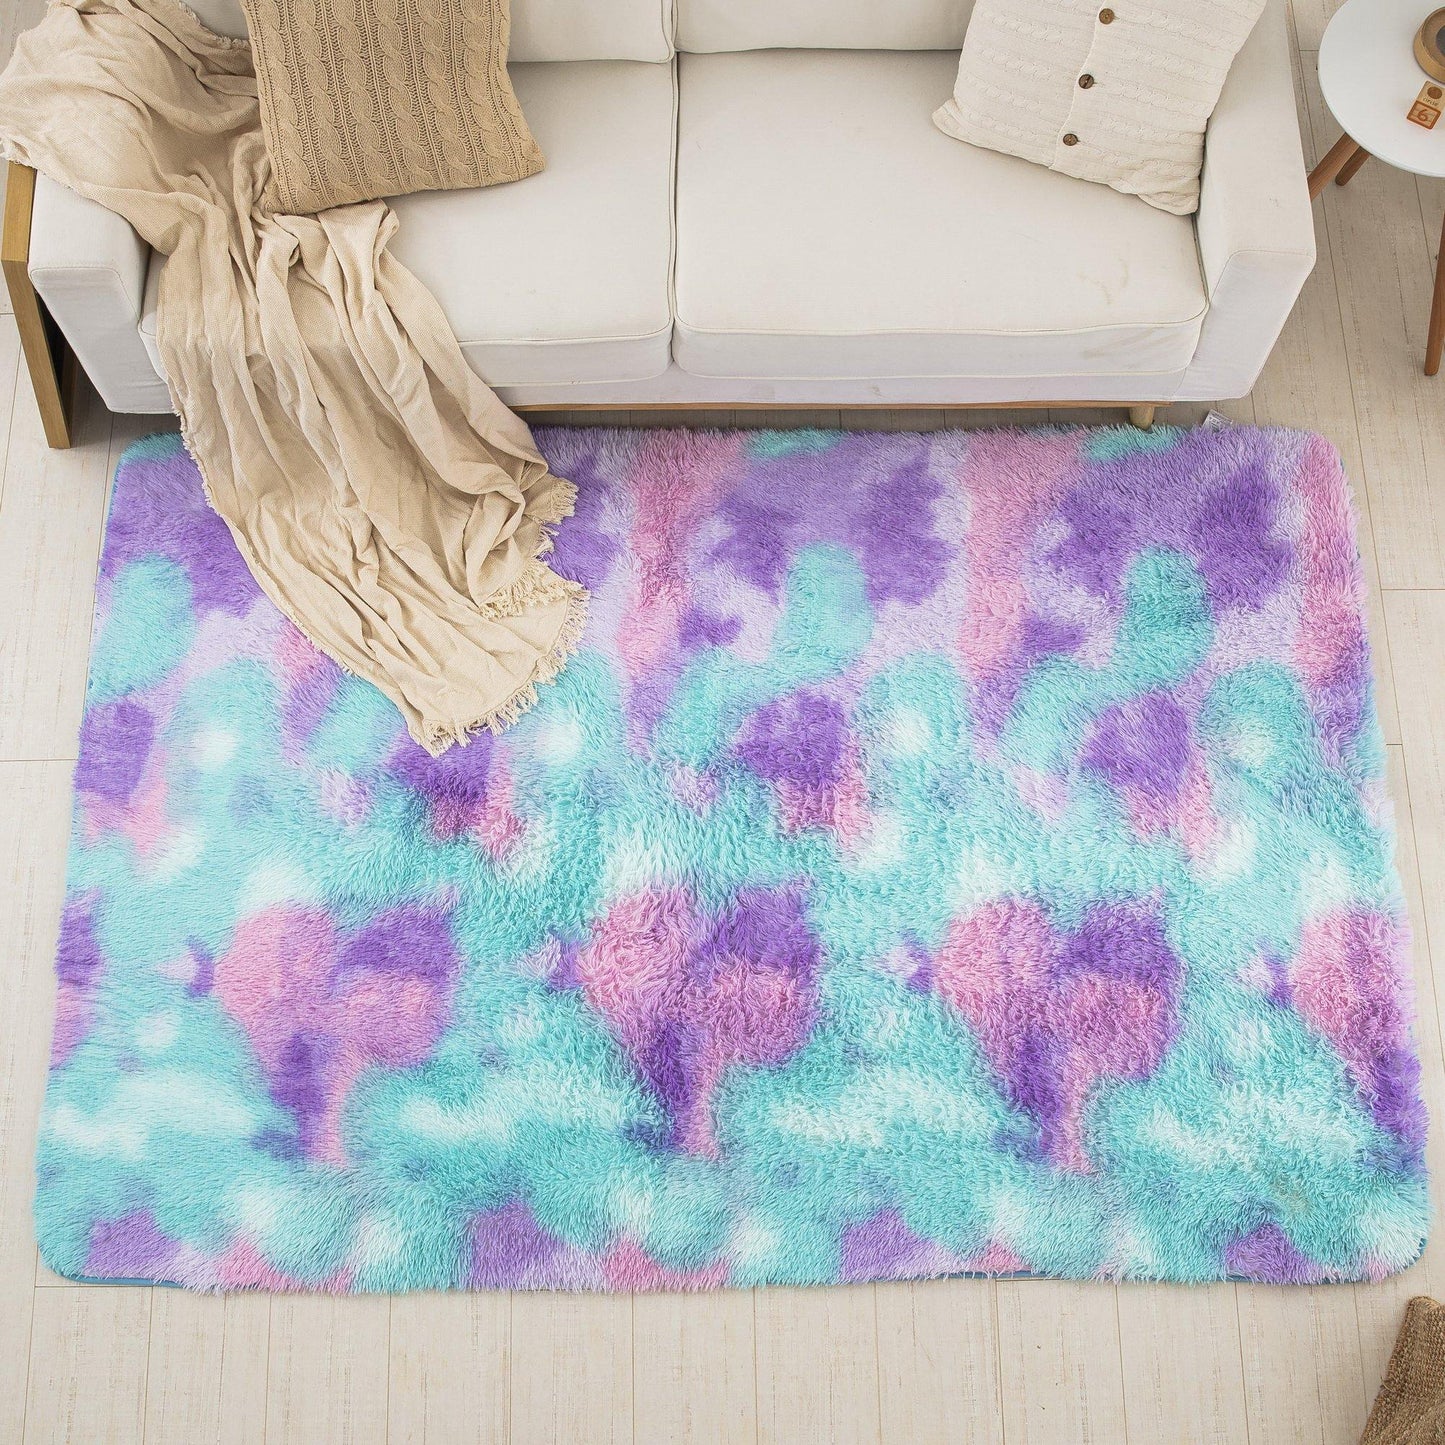 Green and purple mixed color plush carpet - Wongs bedding